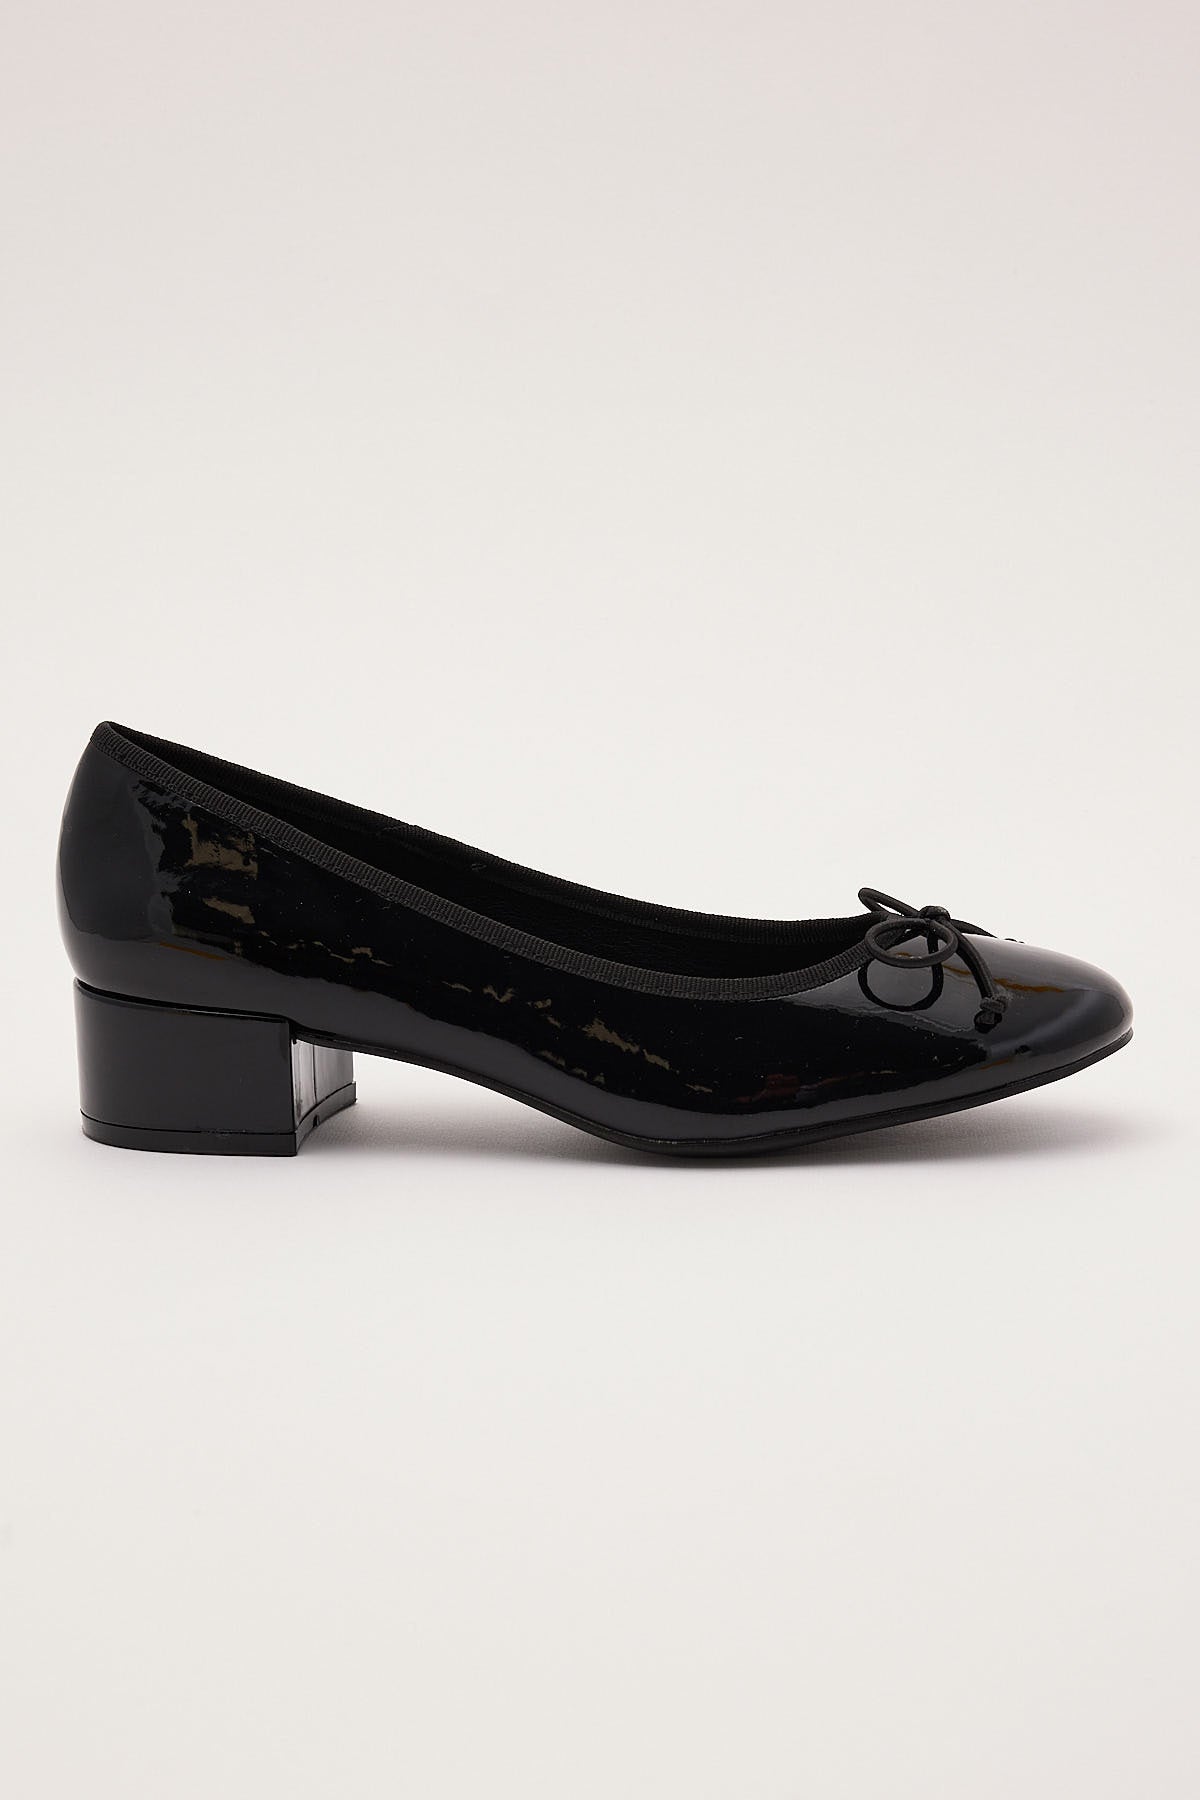 Therapy Diana Patent Shoe Black